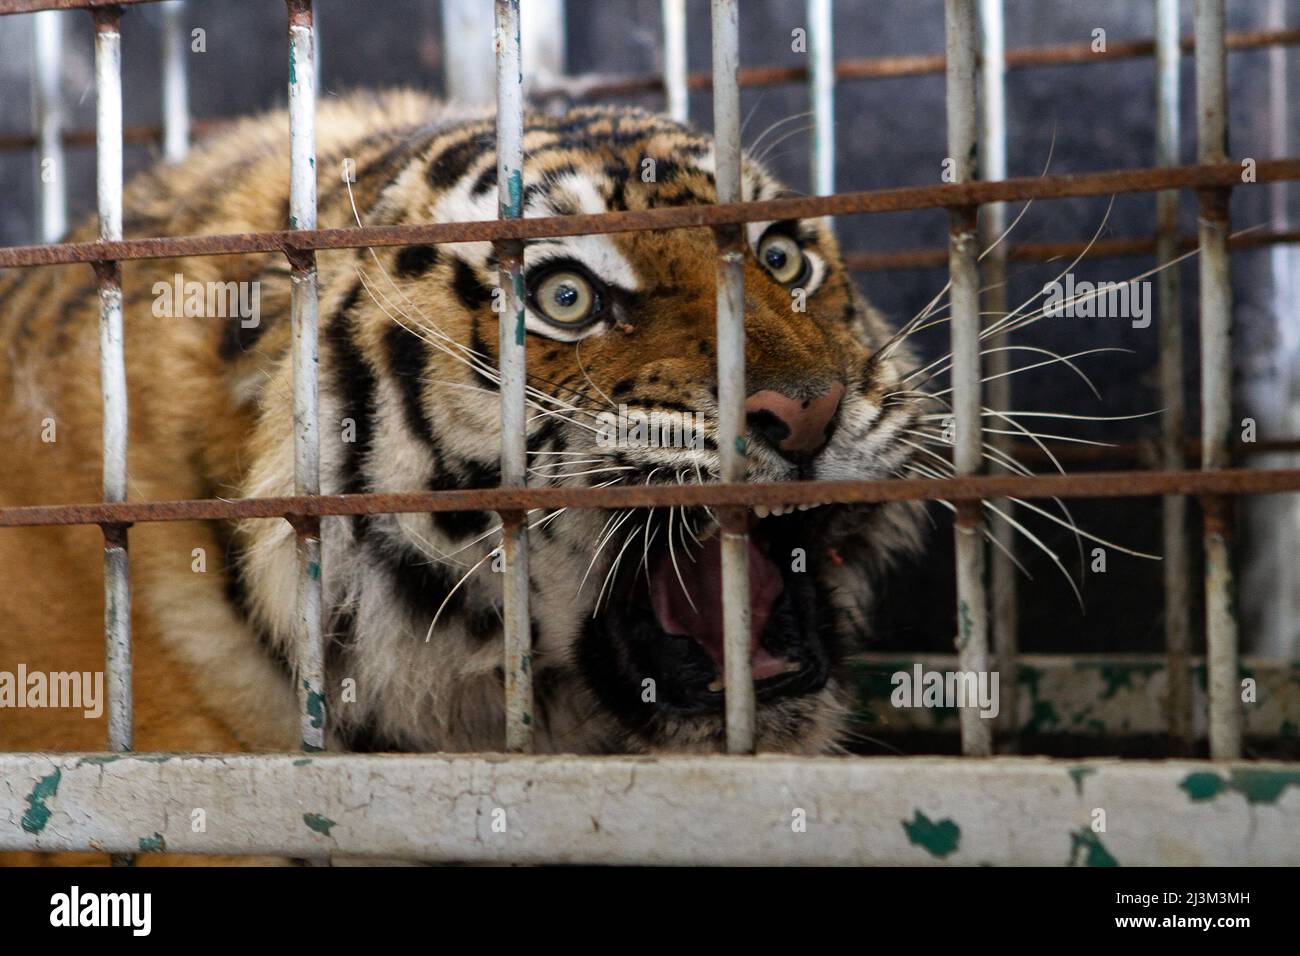 Dnipro, Ukraine. 08th Apr, 2022. A tiger stays in a cage after its evacuation from the ruined Kharkiv Feldman Ecopark, Dnipro, central Ukraine, April 8, 2022. Feldman Ecopark “is no more,” founder Alexander Feldman said in a statement on Tuesday after the zoo was “subjected to massive shelling and bombardment” from Russian forces. The statement said the zoo’s “biggest problem” was large predators, such as lions, tigers and bears, which would pose a major danger to humans if they got out of the zoo and roamed free. Feldman said their enclosures were intact but couldn’t withstand more damage. Fo Stock Photo